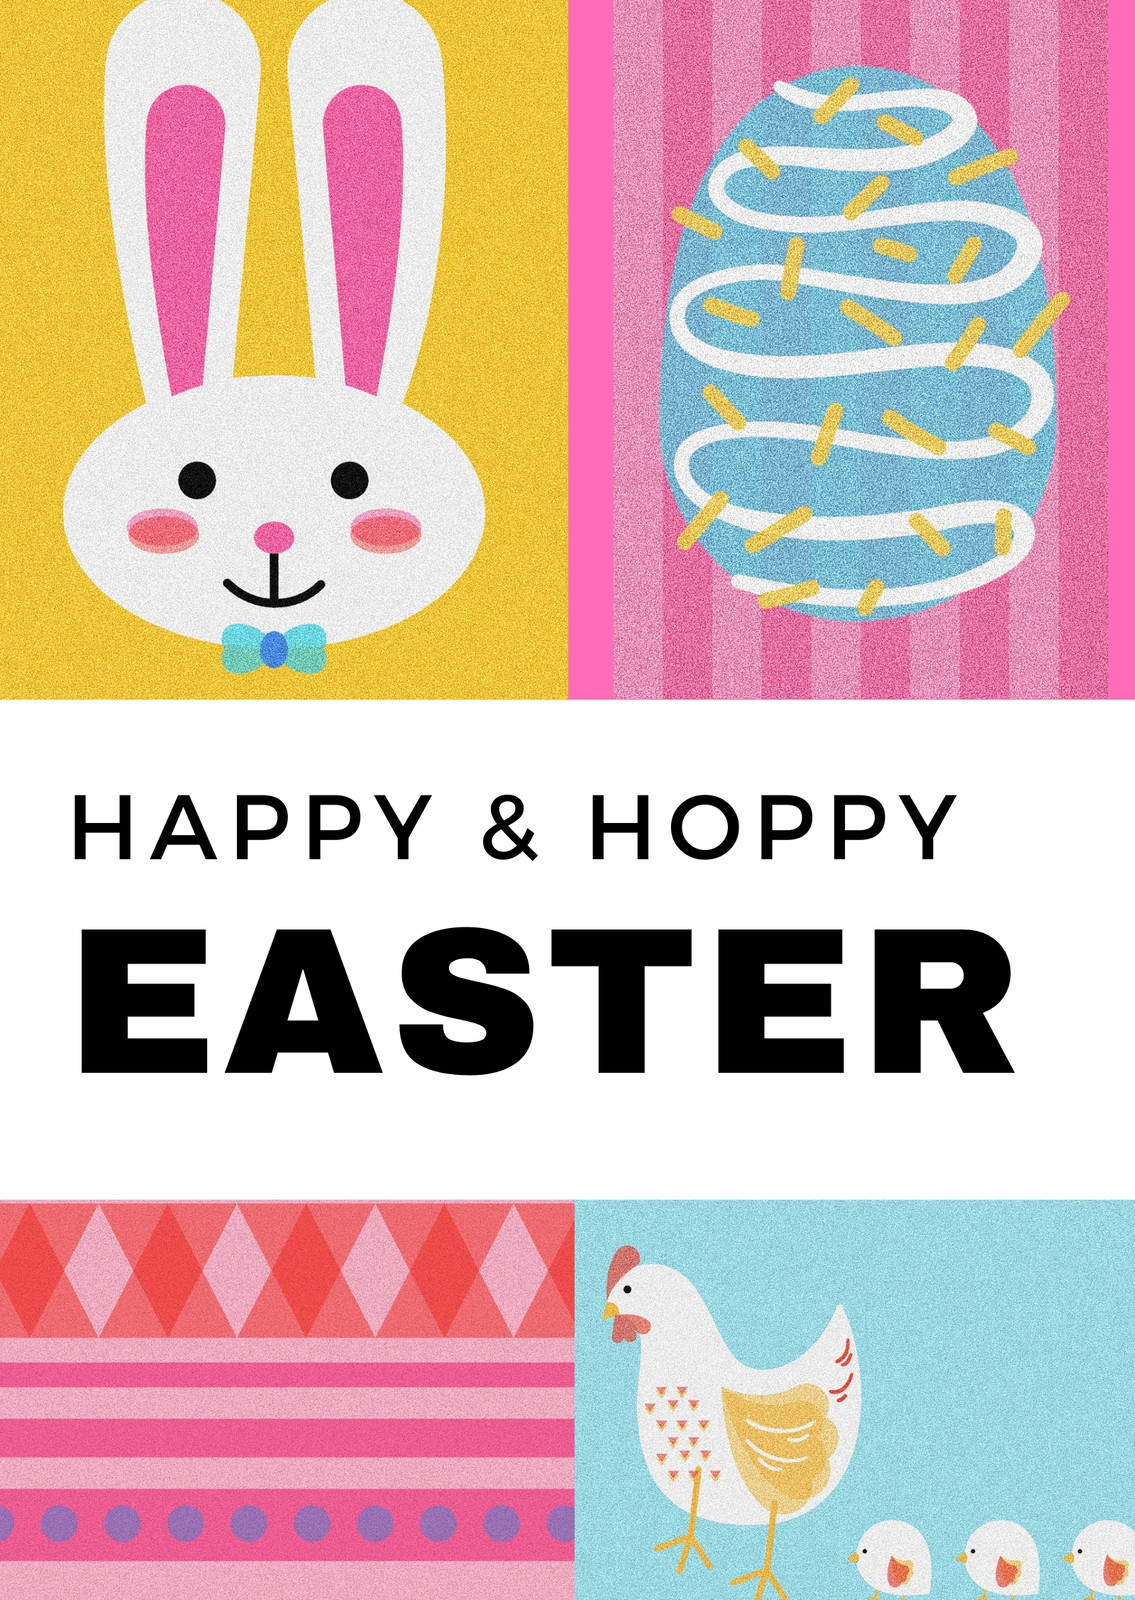 Free and customizable bunny templates